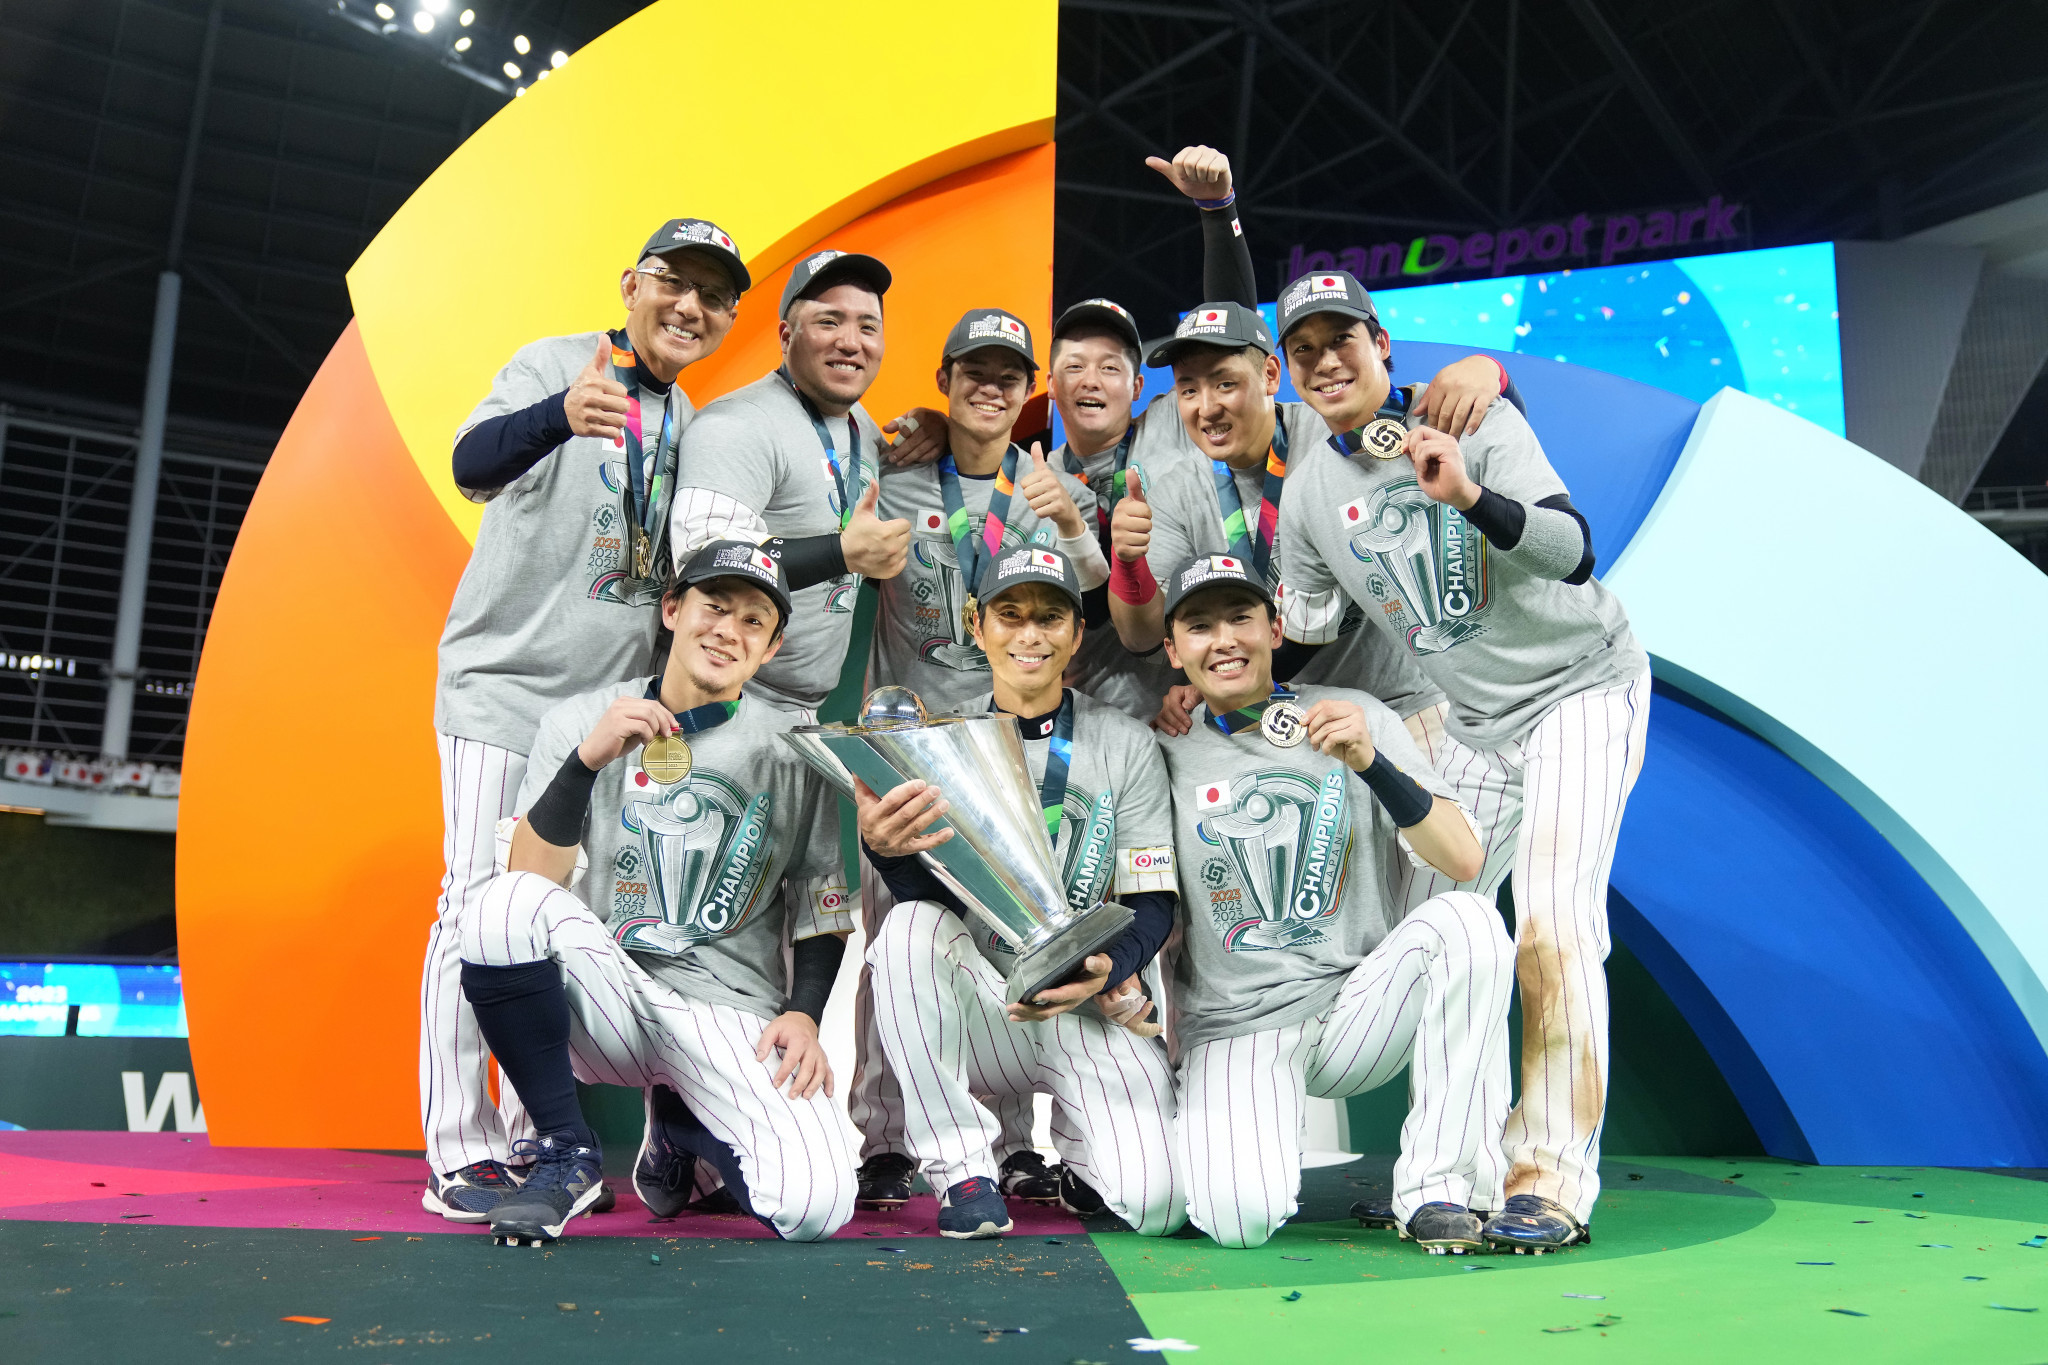 Japan crowned champions once again at World Baseball Classic